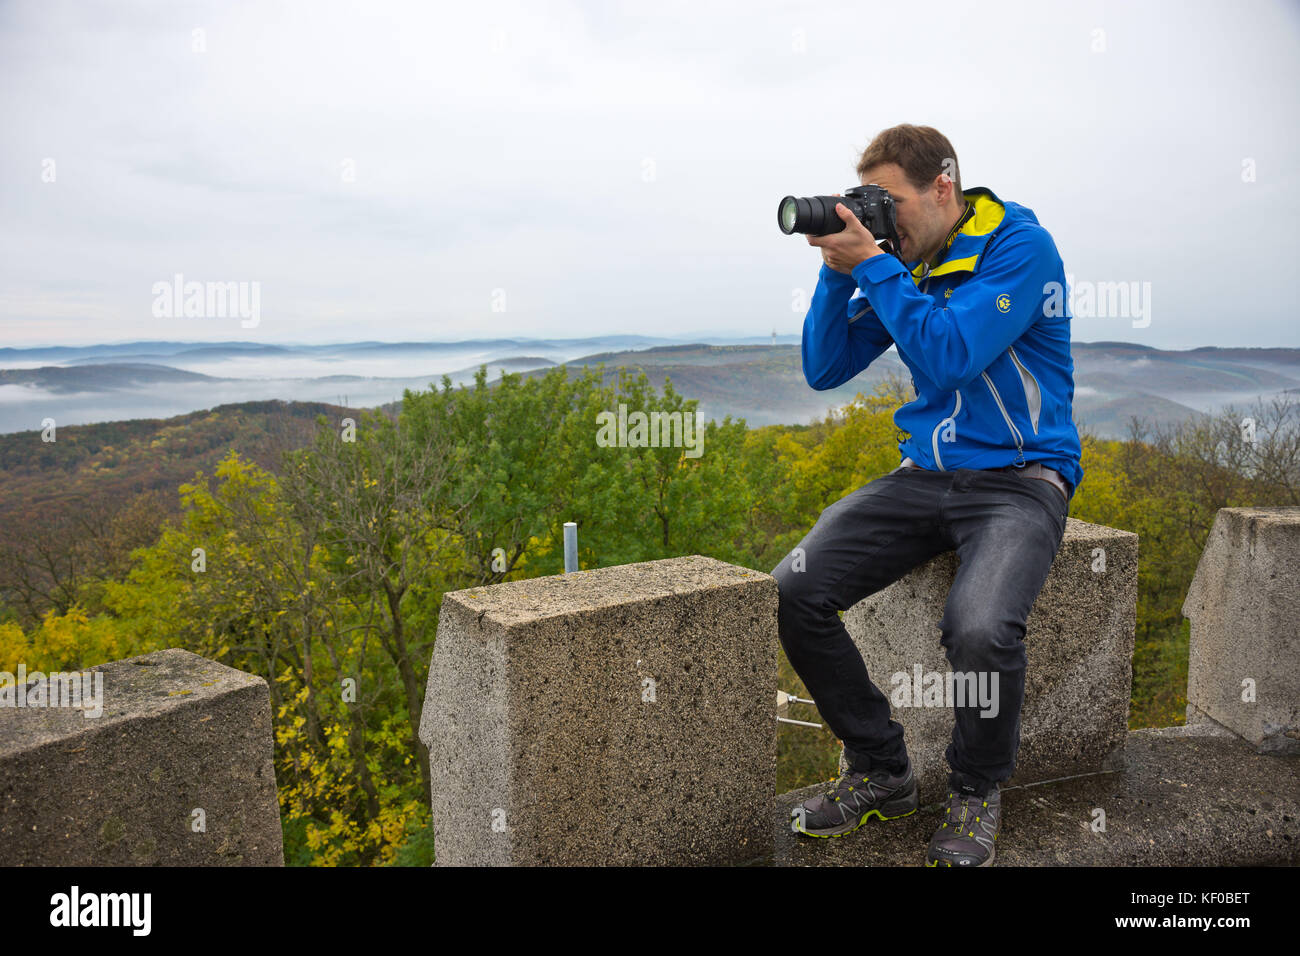 Photographer taking a photo on a mountain in Wienerwald on a misty and gloomy autumn day. Stock Photo